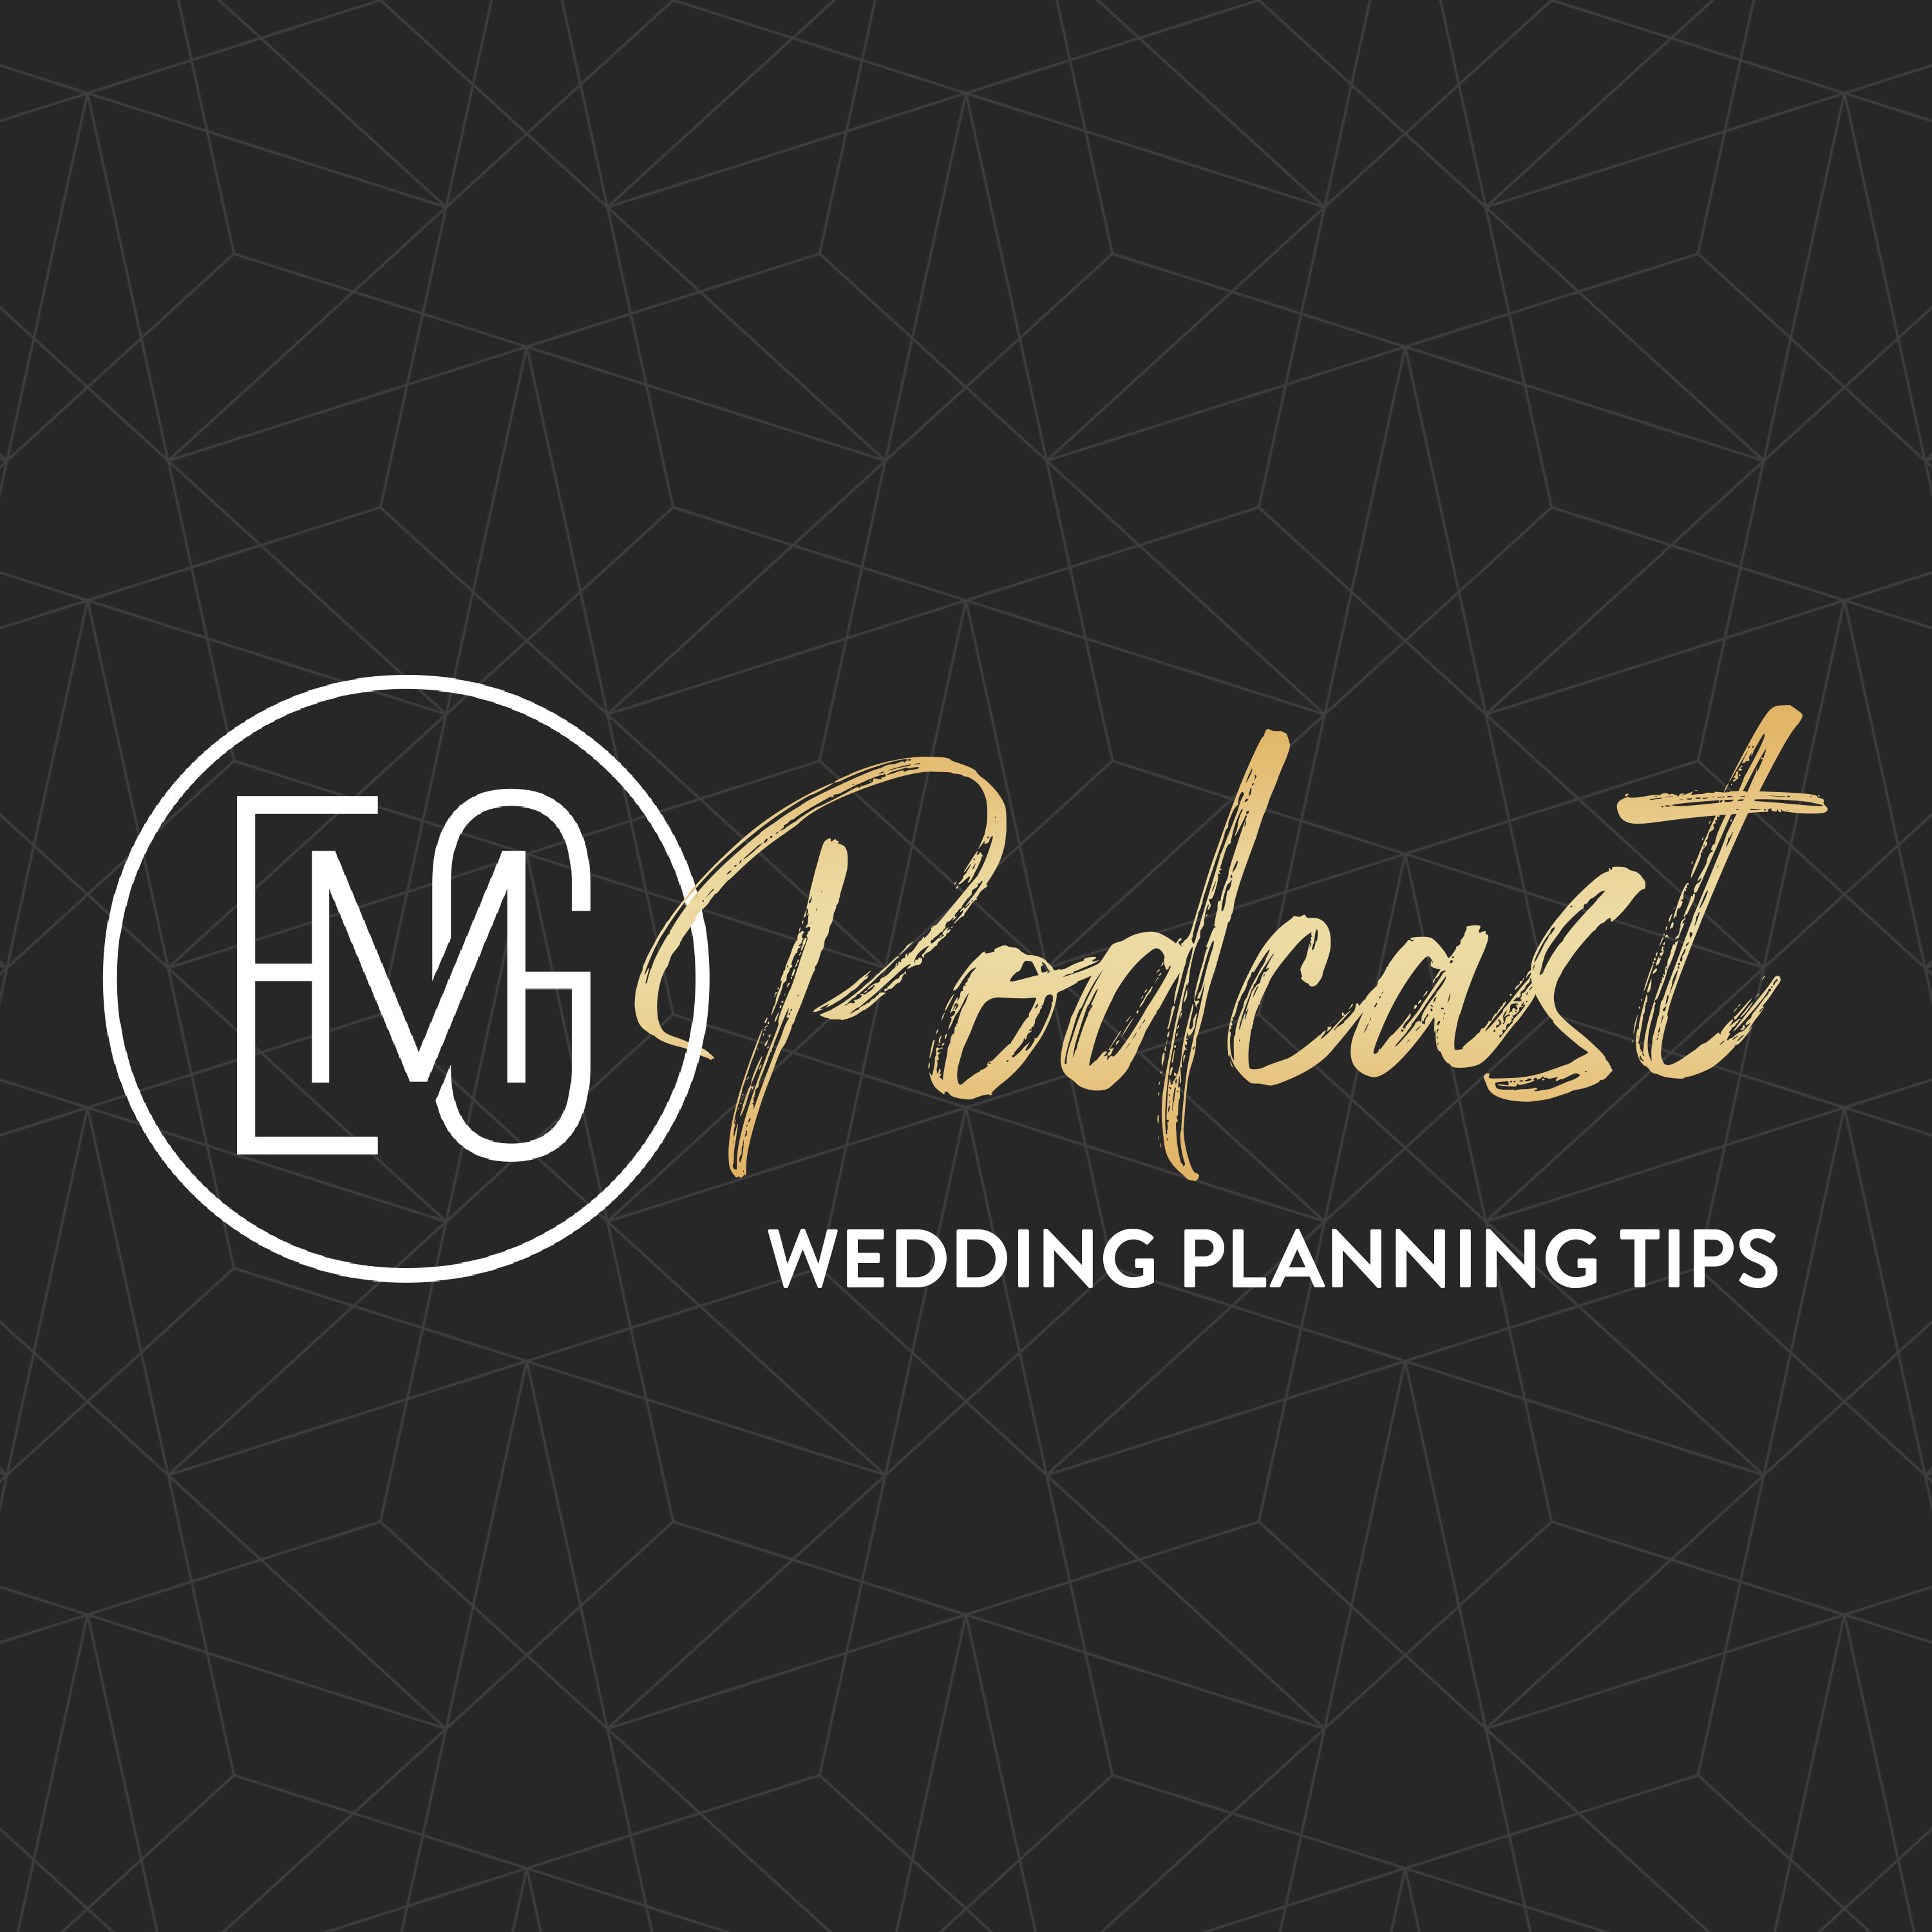 Planning Tips: Selecting Music for Your Wedding Reception